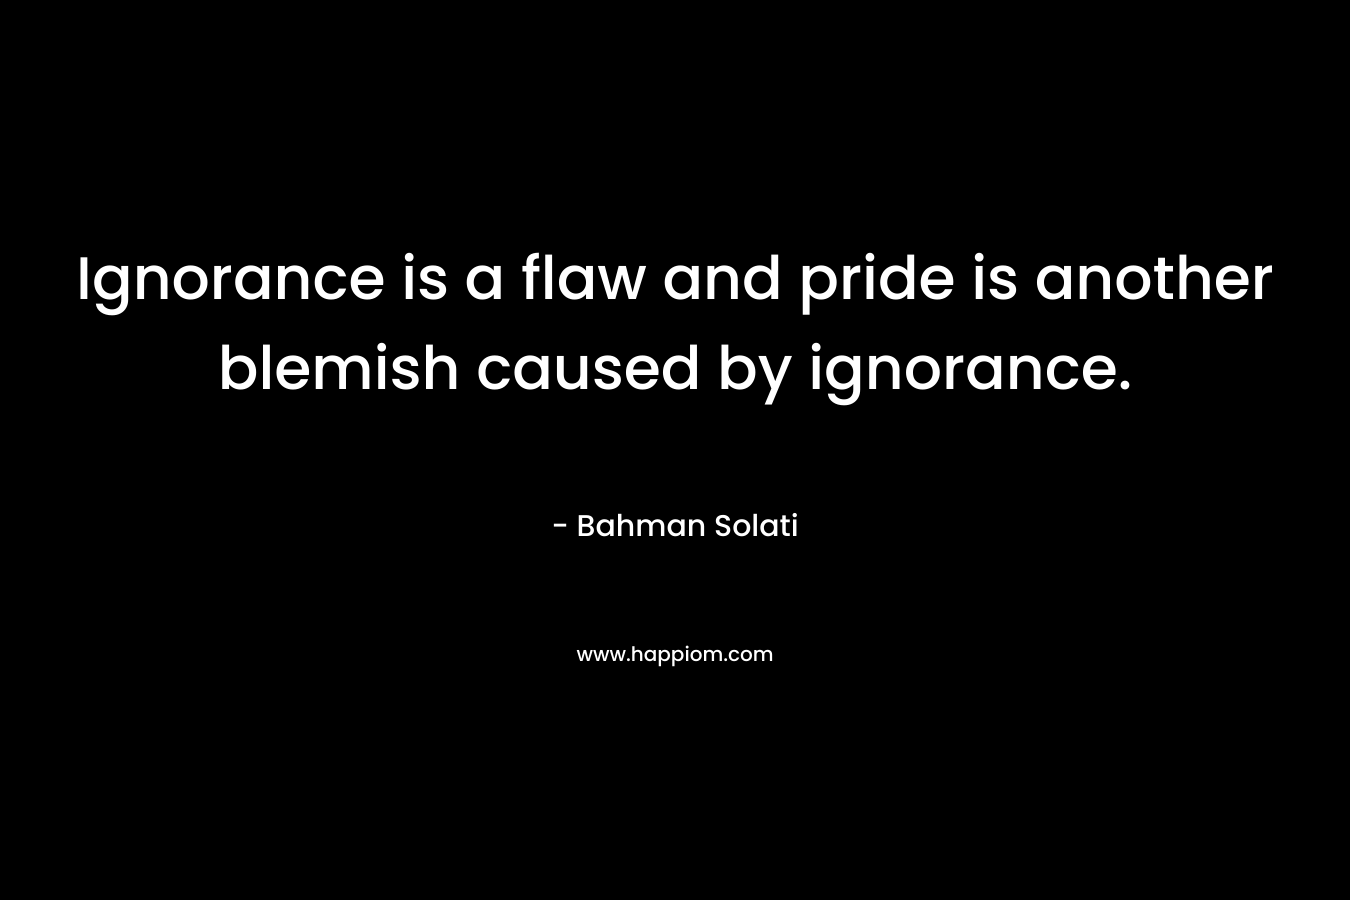 Ignorance is a flaw and pride is another blemish caused by ignorance.